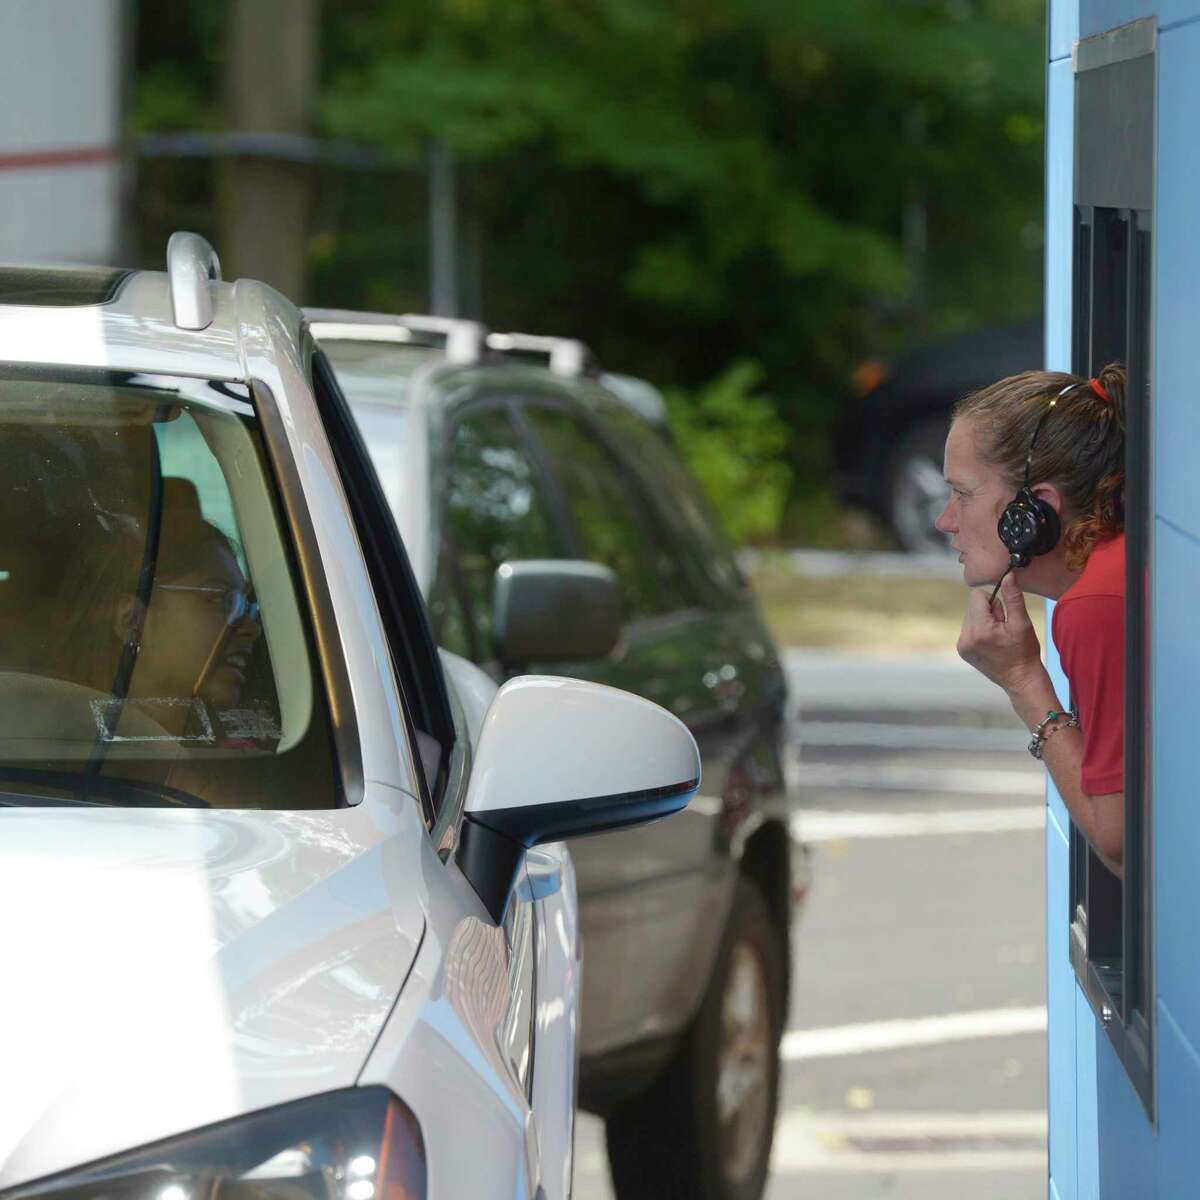 Maureen Allen, assistant manager, leans out the drive-thru window to speak with a customer at the grand opening of a new Sonic restaurant on White Street. Owner Mir Ahmed also owns another Sonic in New Milford. Thursday, July 21, 2022, Danbury, Conn.